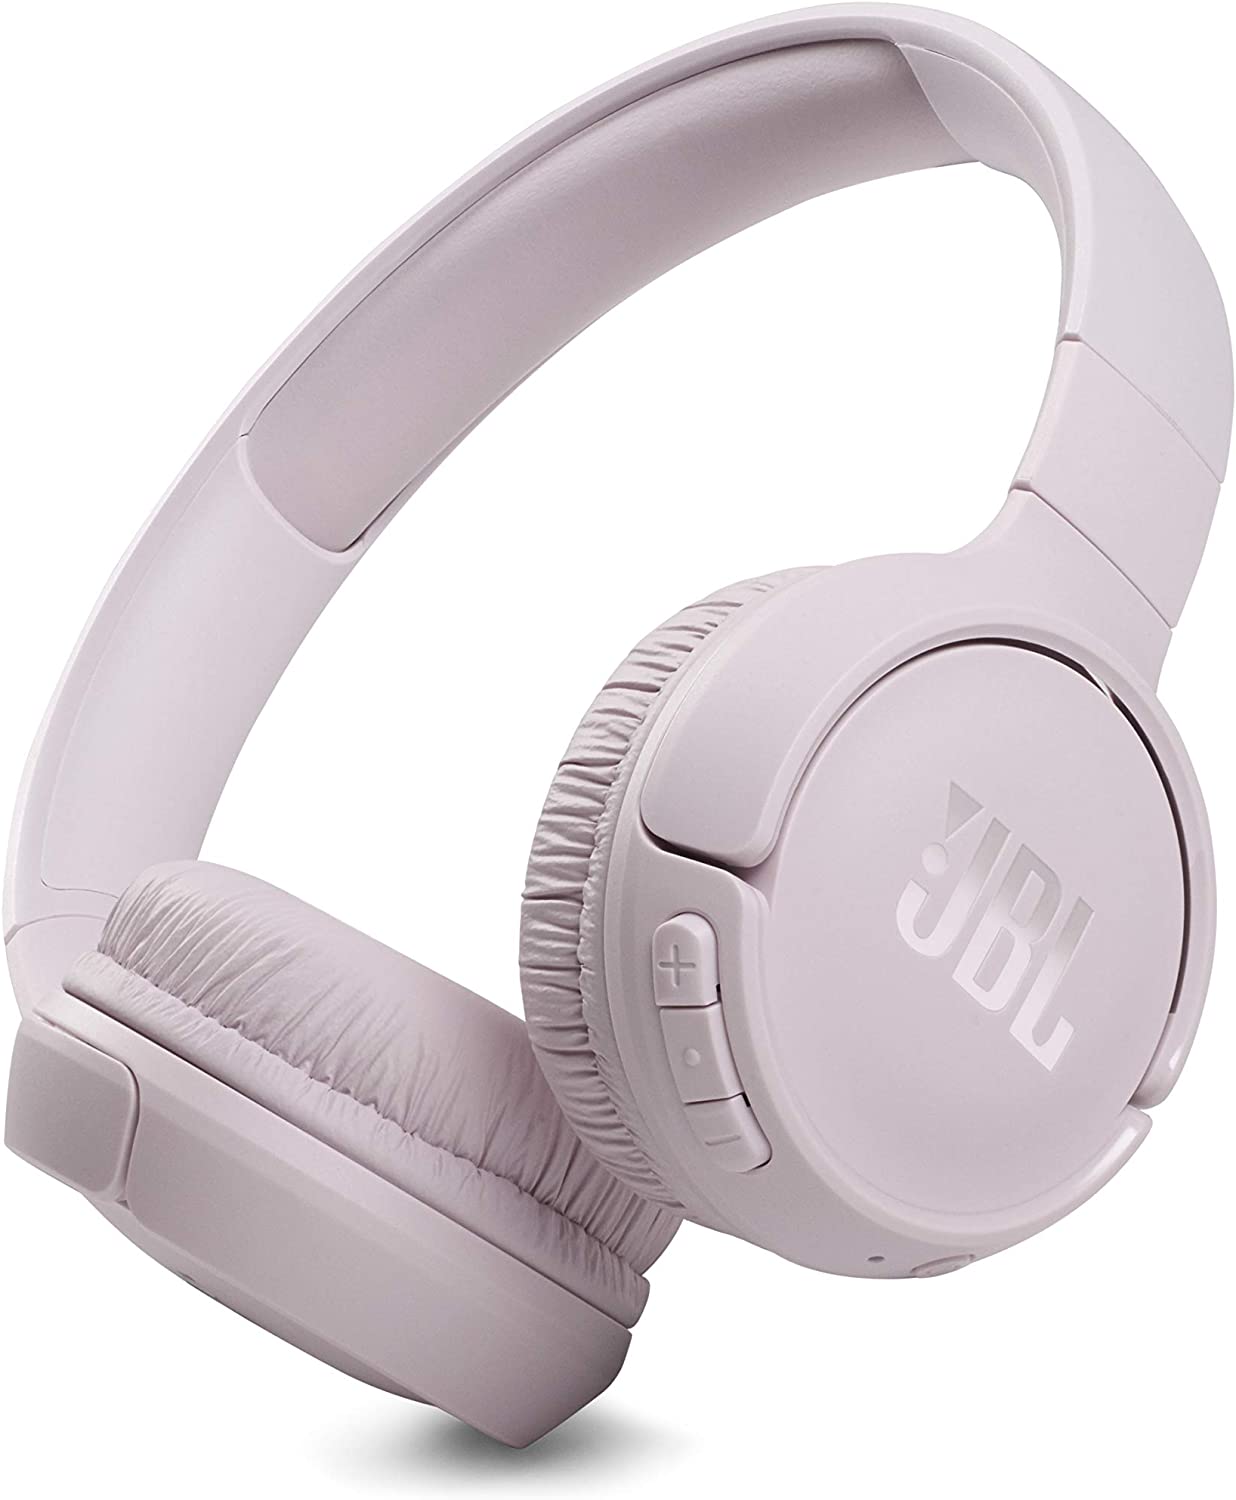 JBL Tune 510BT: Wireless On-Ear Headphones with Purebass Sound - Rose ( Color: Rose )